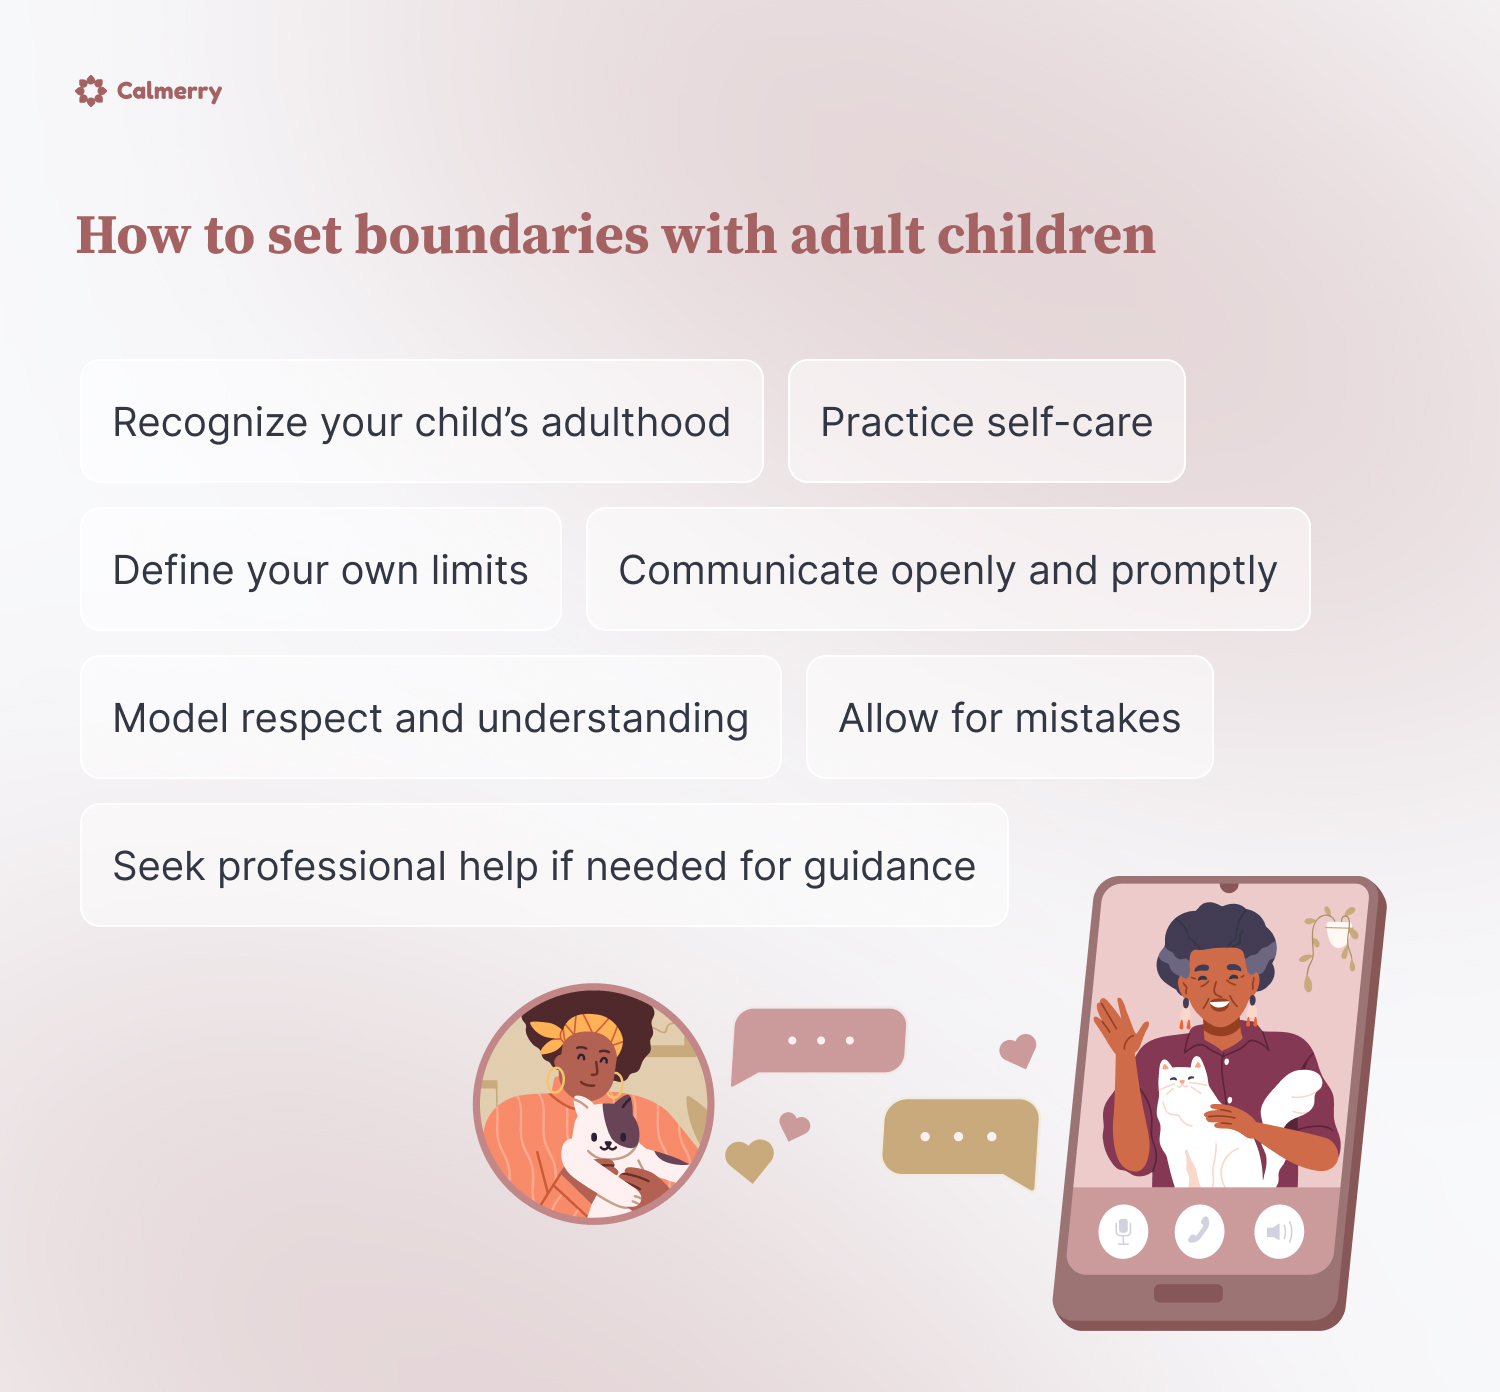 How to set boundaries with adult children
Recognize your child’s adulthood
Communicate openly and promptly
Define your own limits
Model respect and understanding
Allow for mistakes
Practice self-care
Seek professional help if needed for guidance